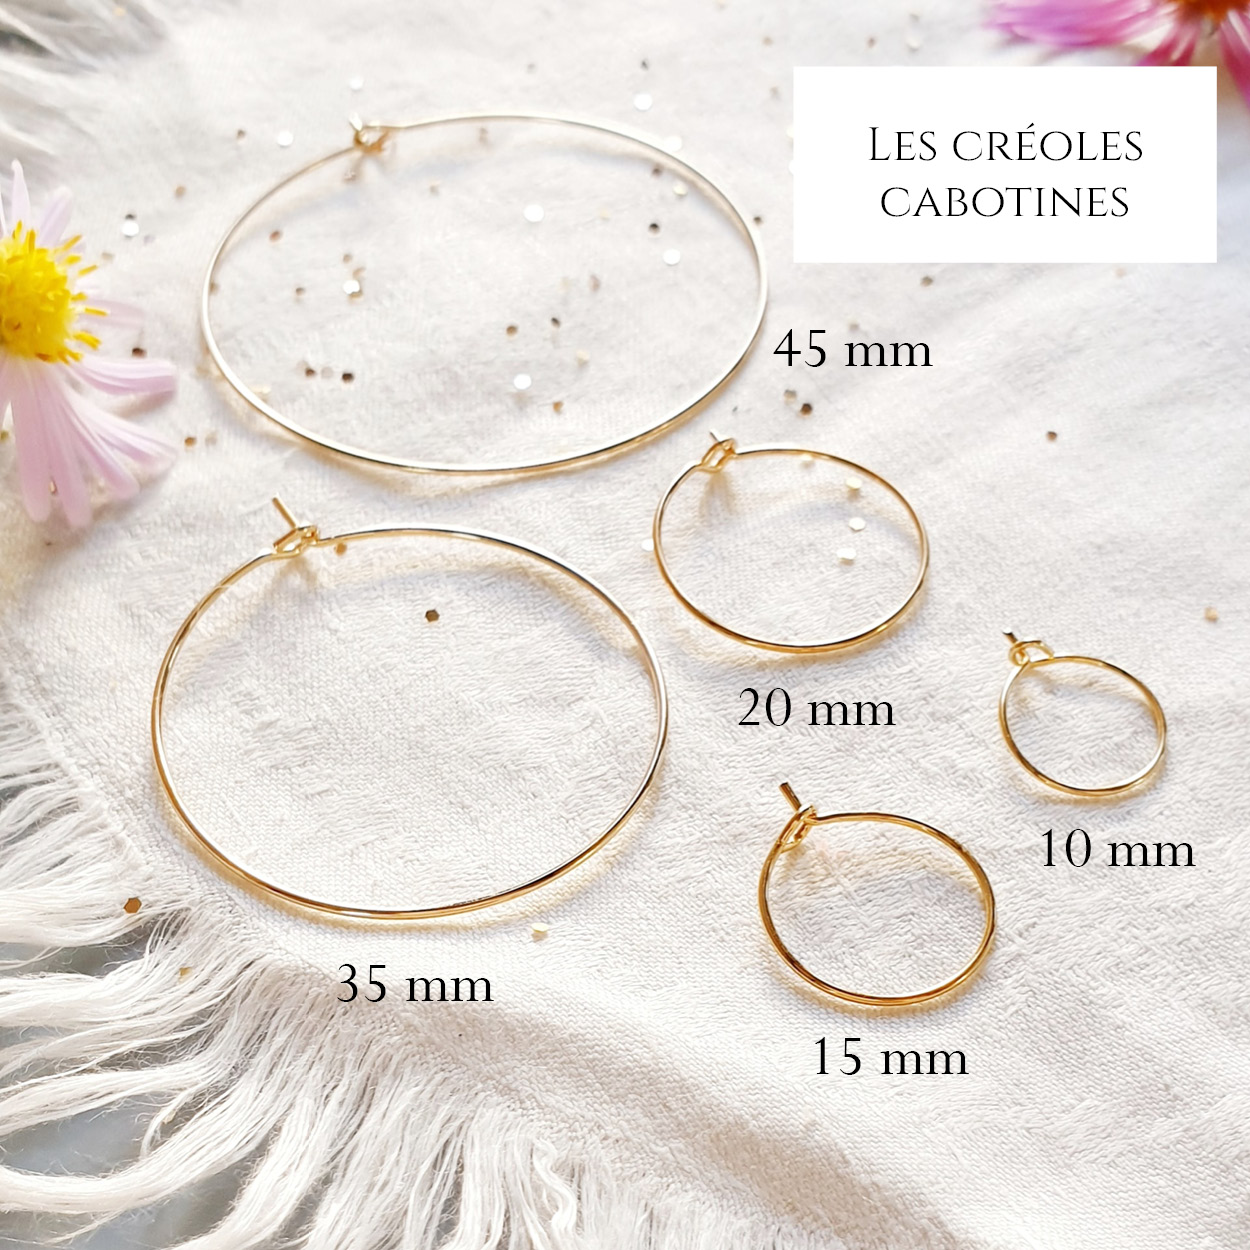 admin creoles lisses cabotines taille